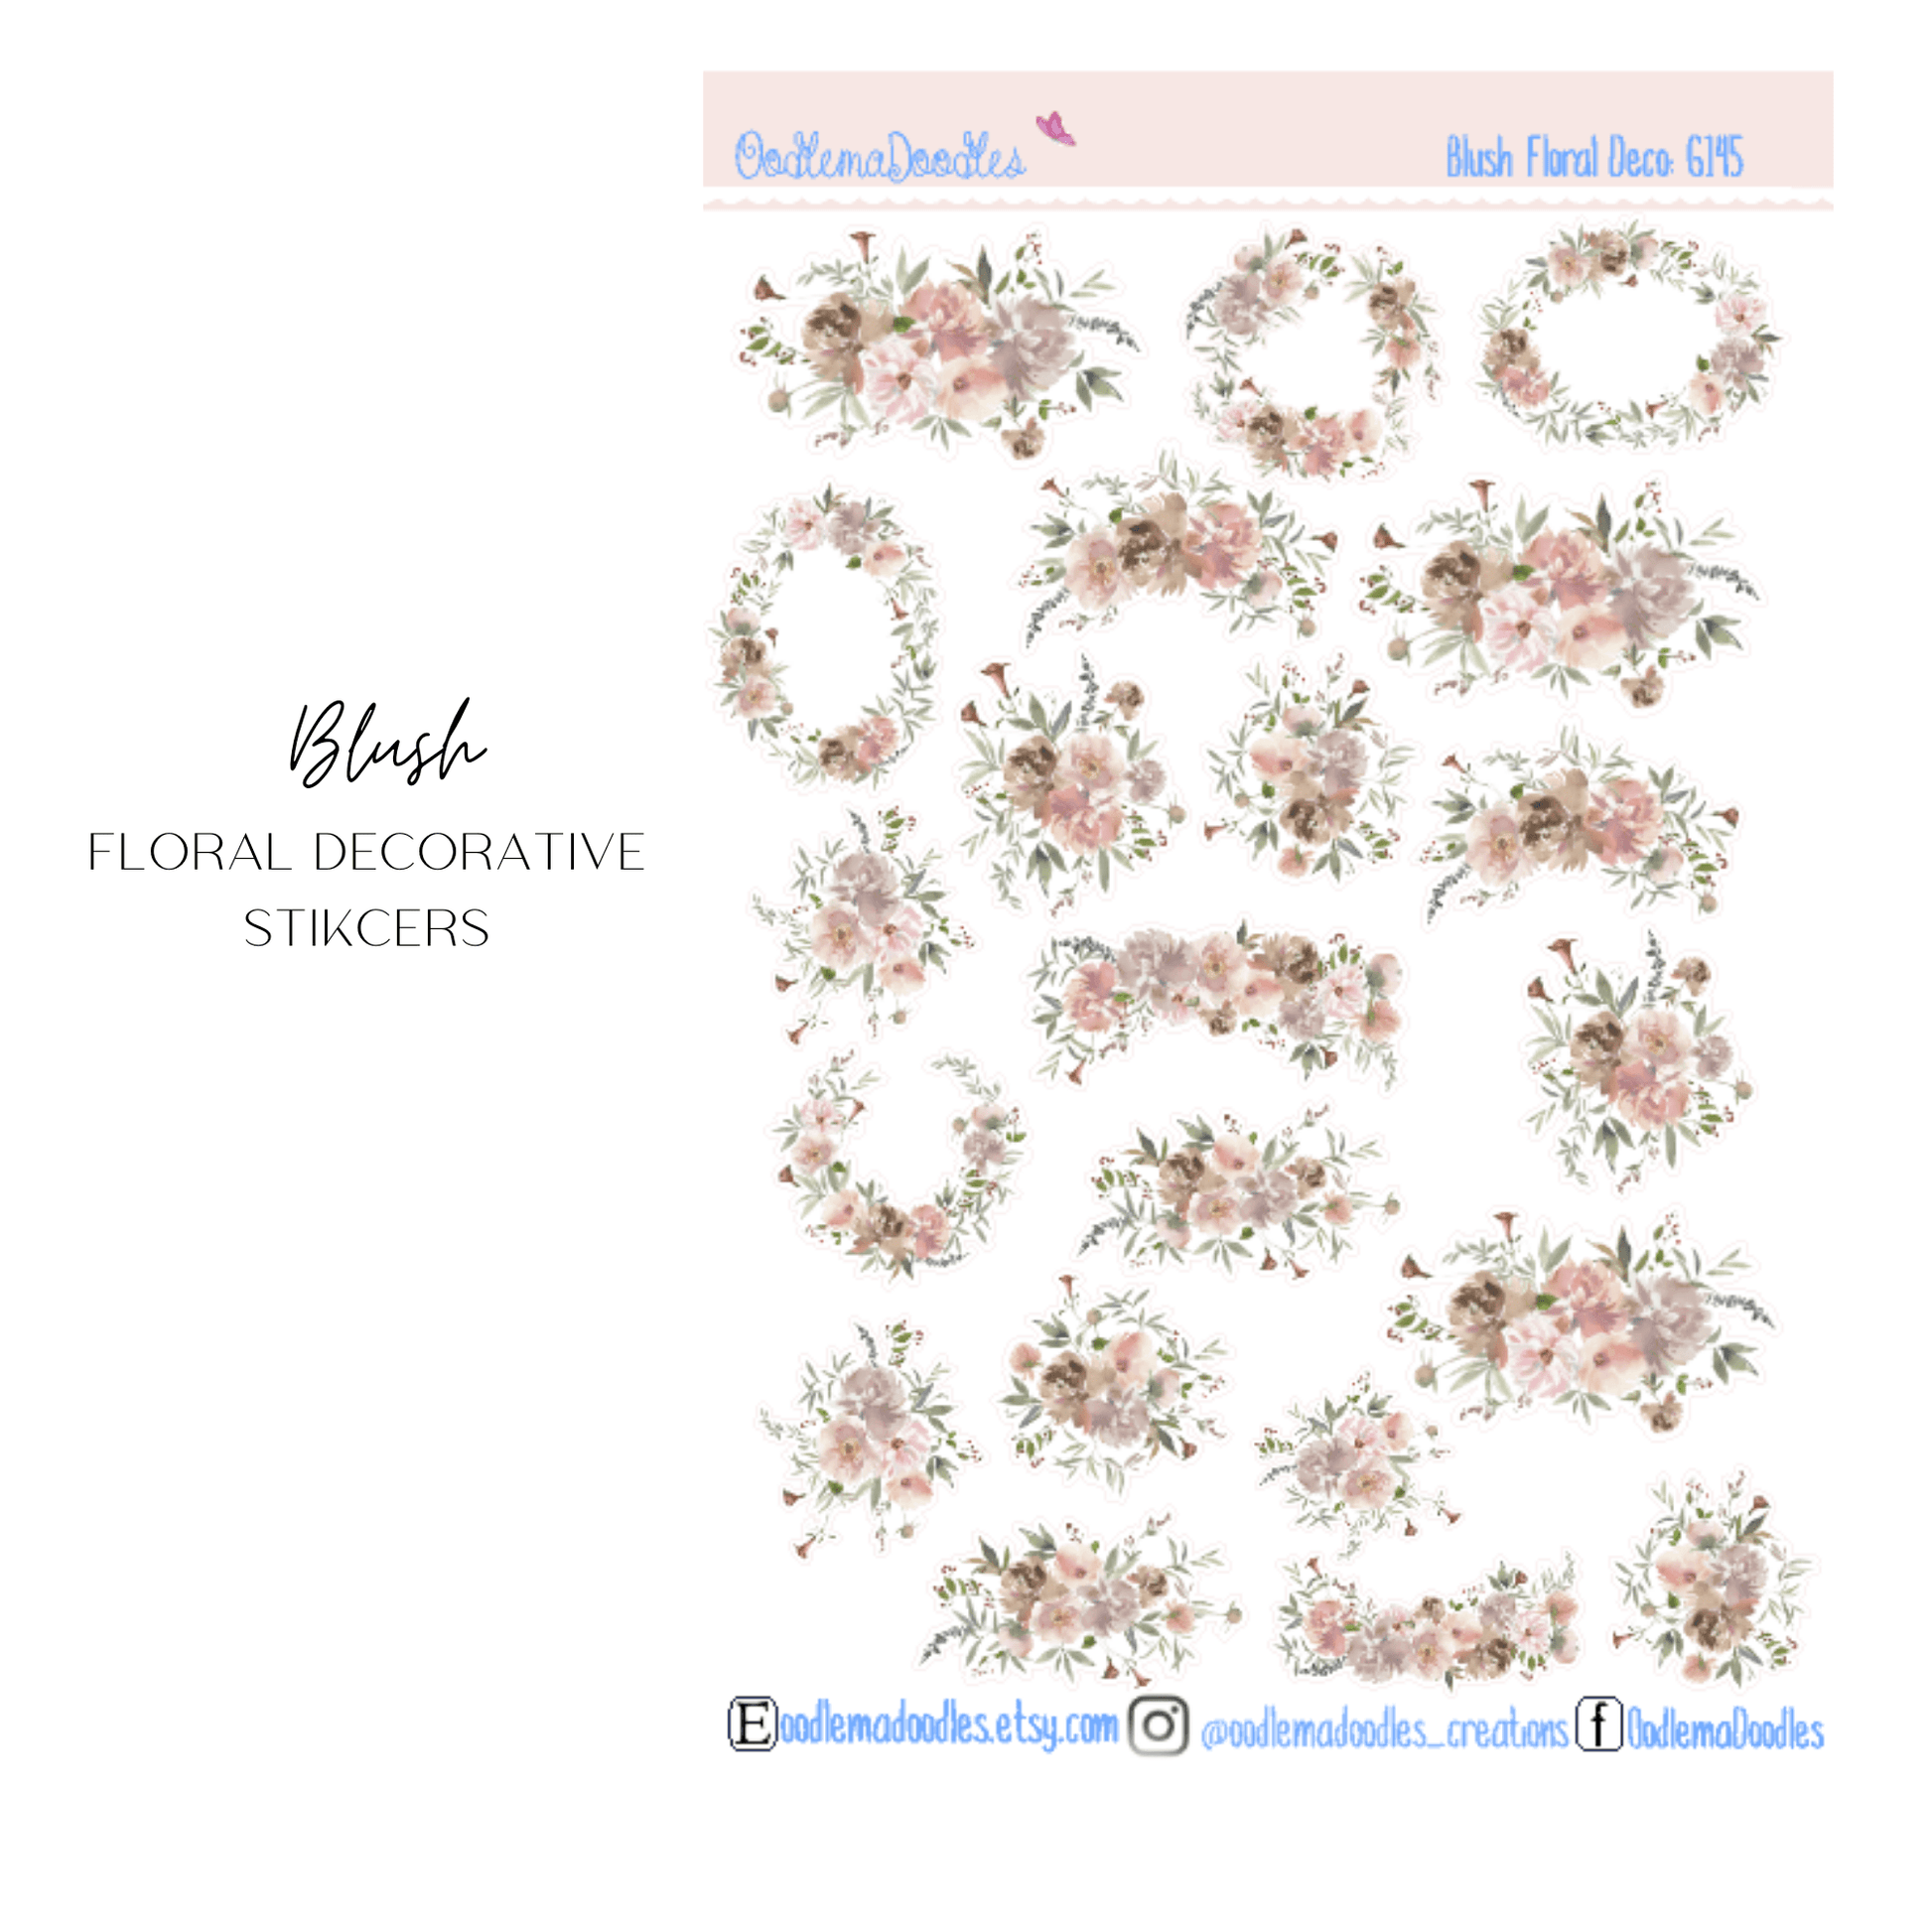 Blush Floral Decorative Stickers - oodlemadoodles